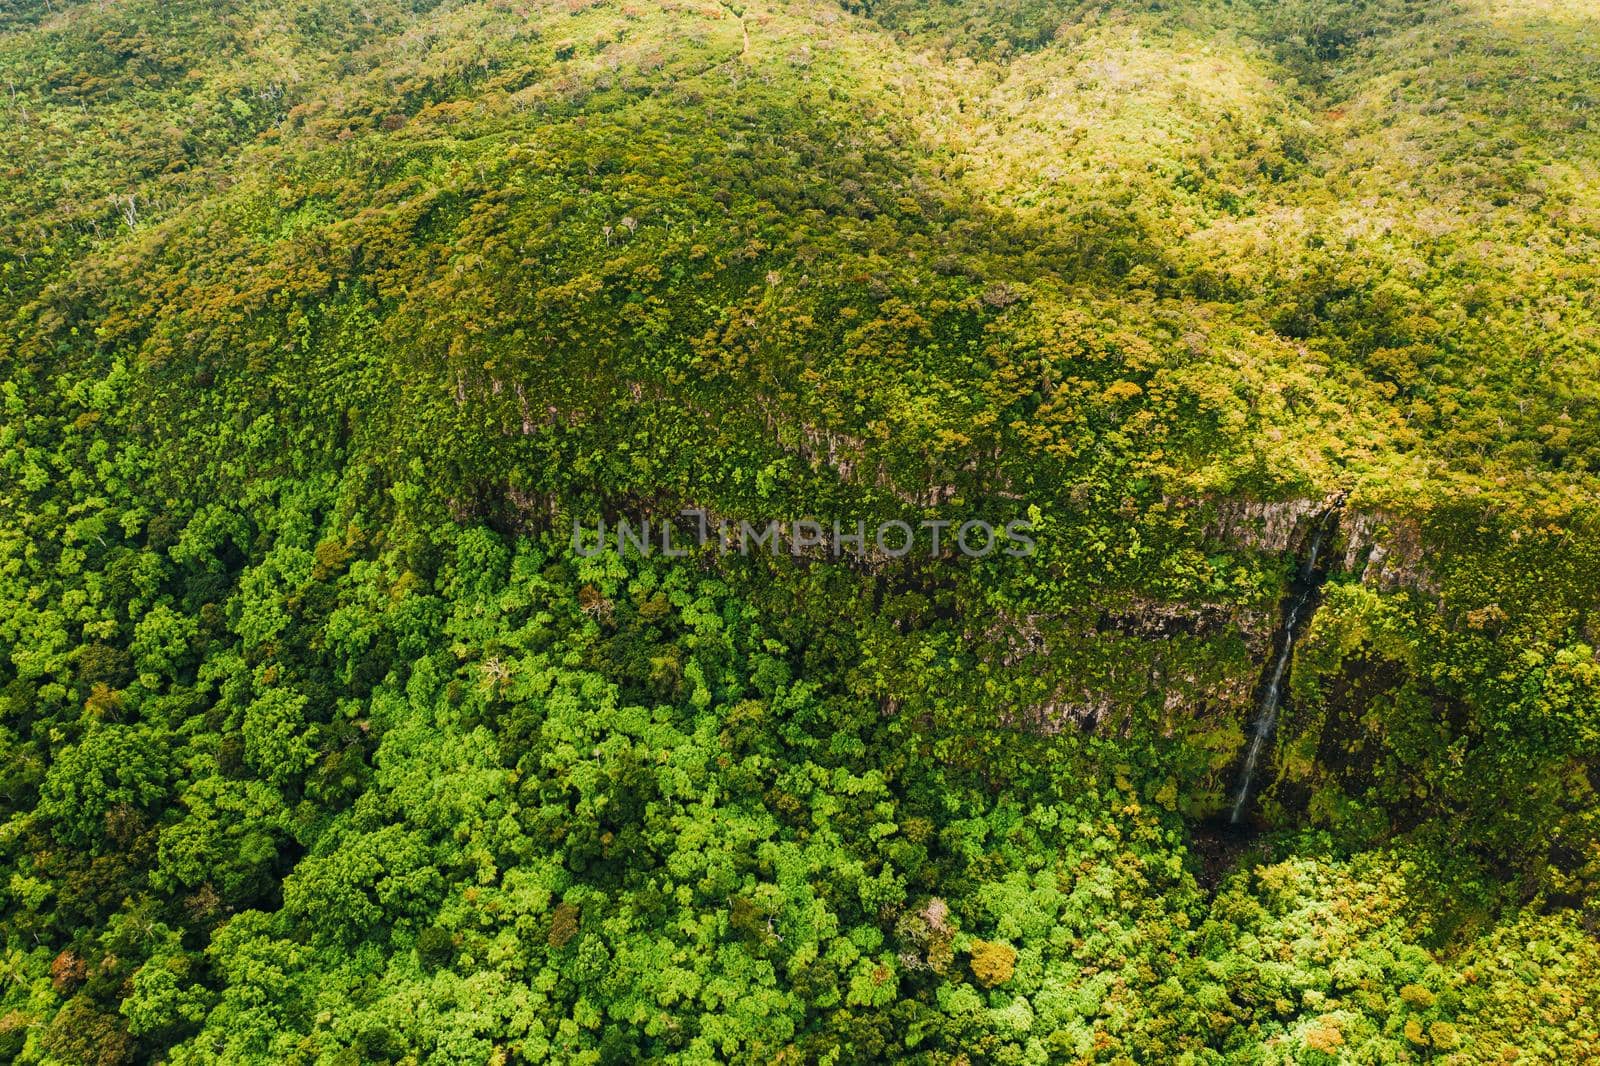 Bird's-eye view of the mountains and fields of the island of Mauritius.Landscapes Of Mauritius